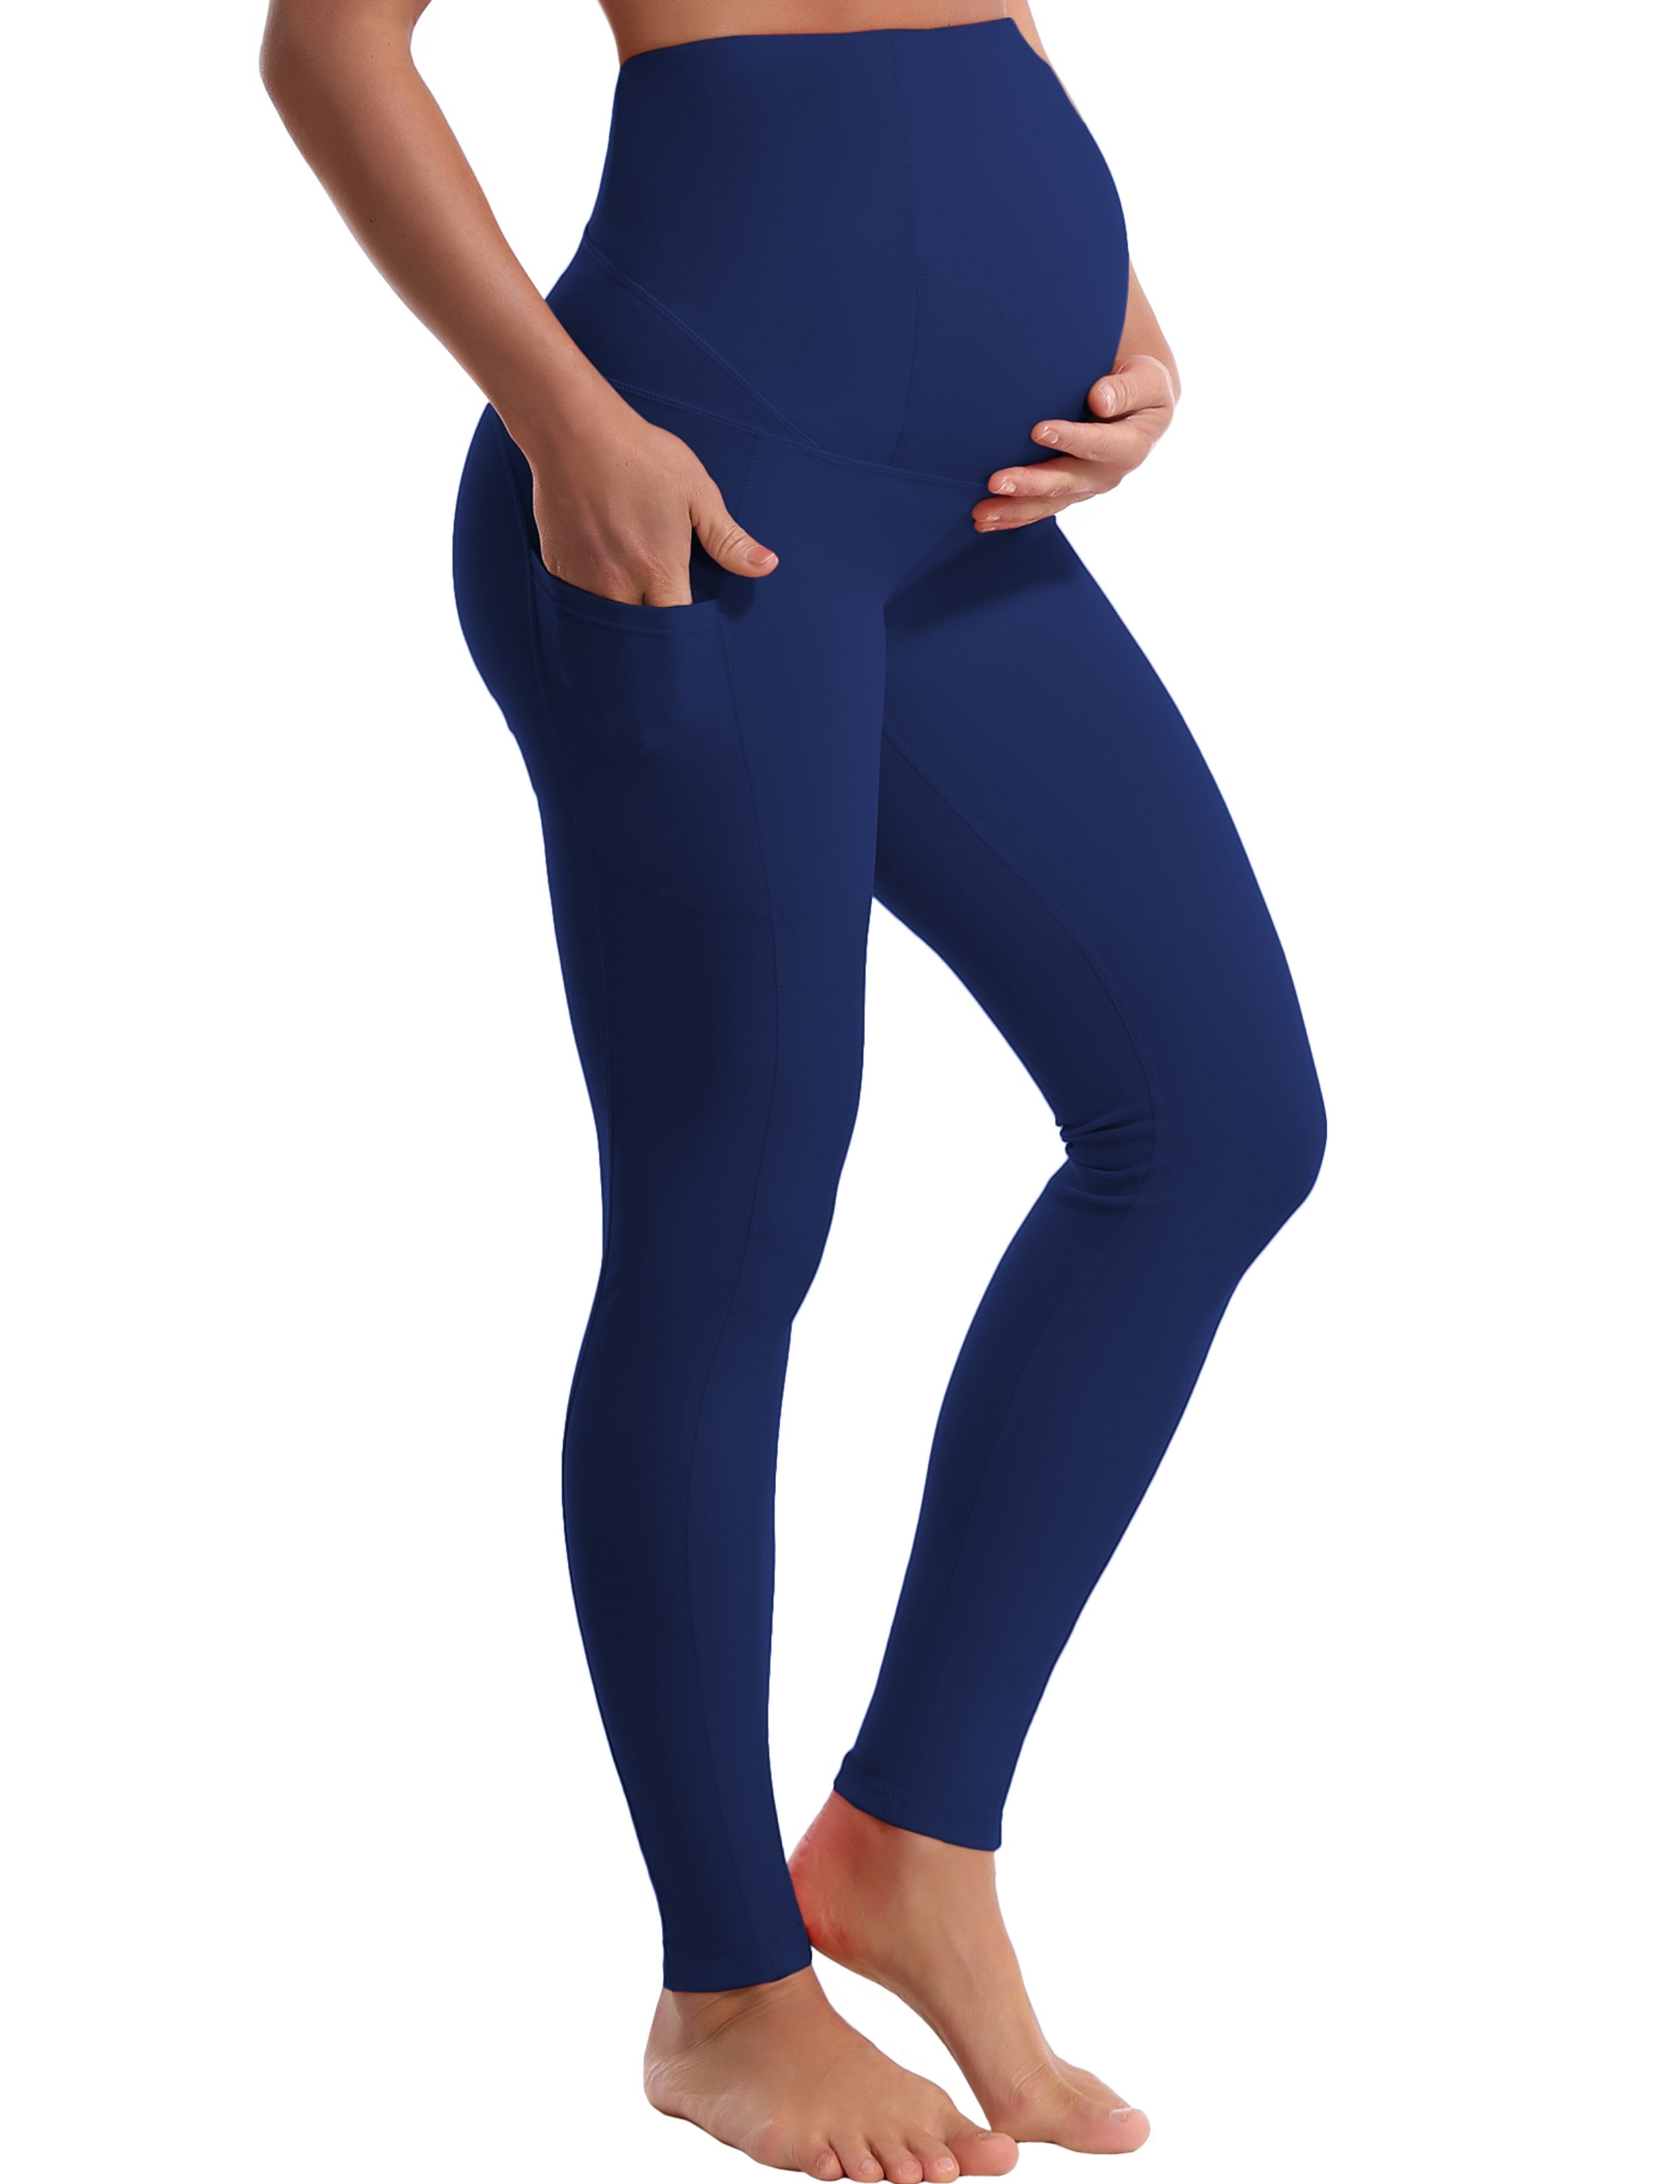 26" Side Pockets Maternity Yoga Pants navy 87%Nylon/13%Spandex Softest-ever fabric High elasticity 4-way stretch Fabric doesn't attract lint easily No see-through Moisture-wicking Machine wash